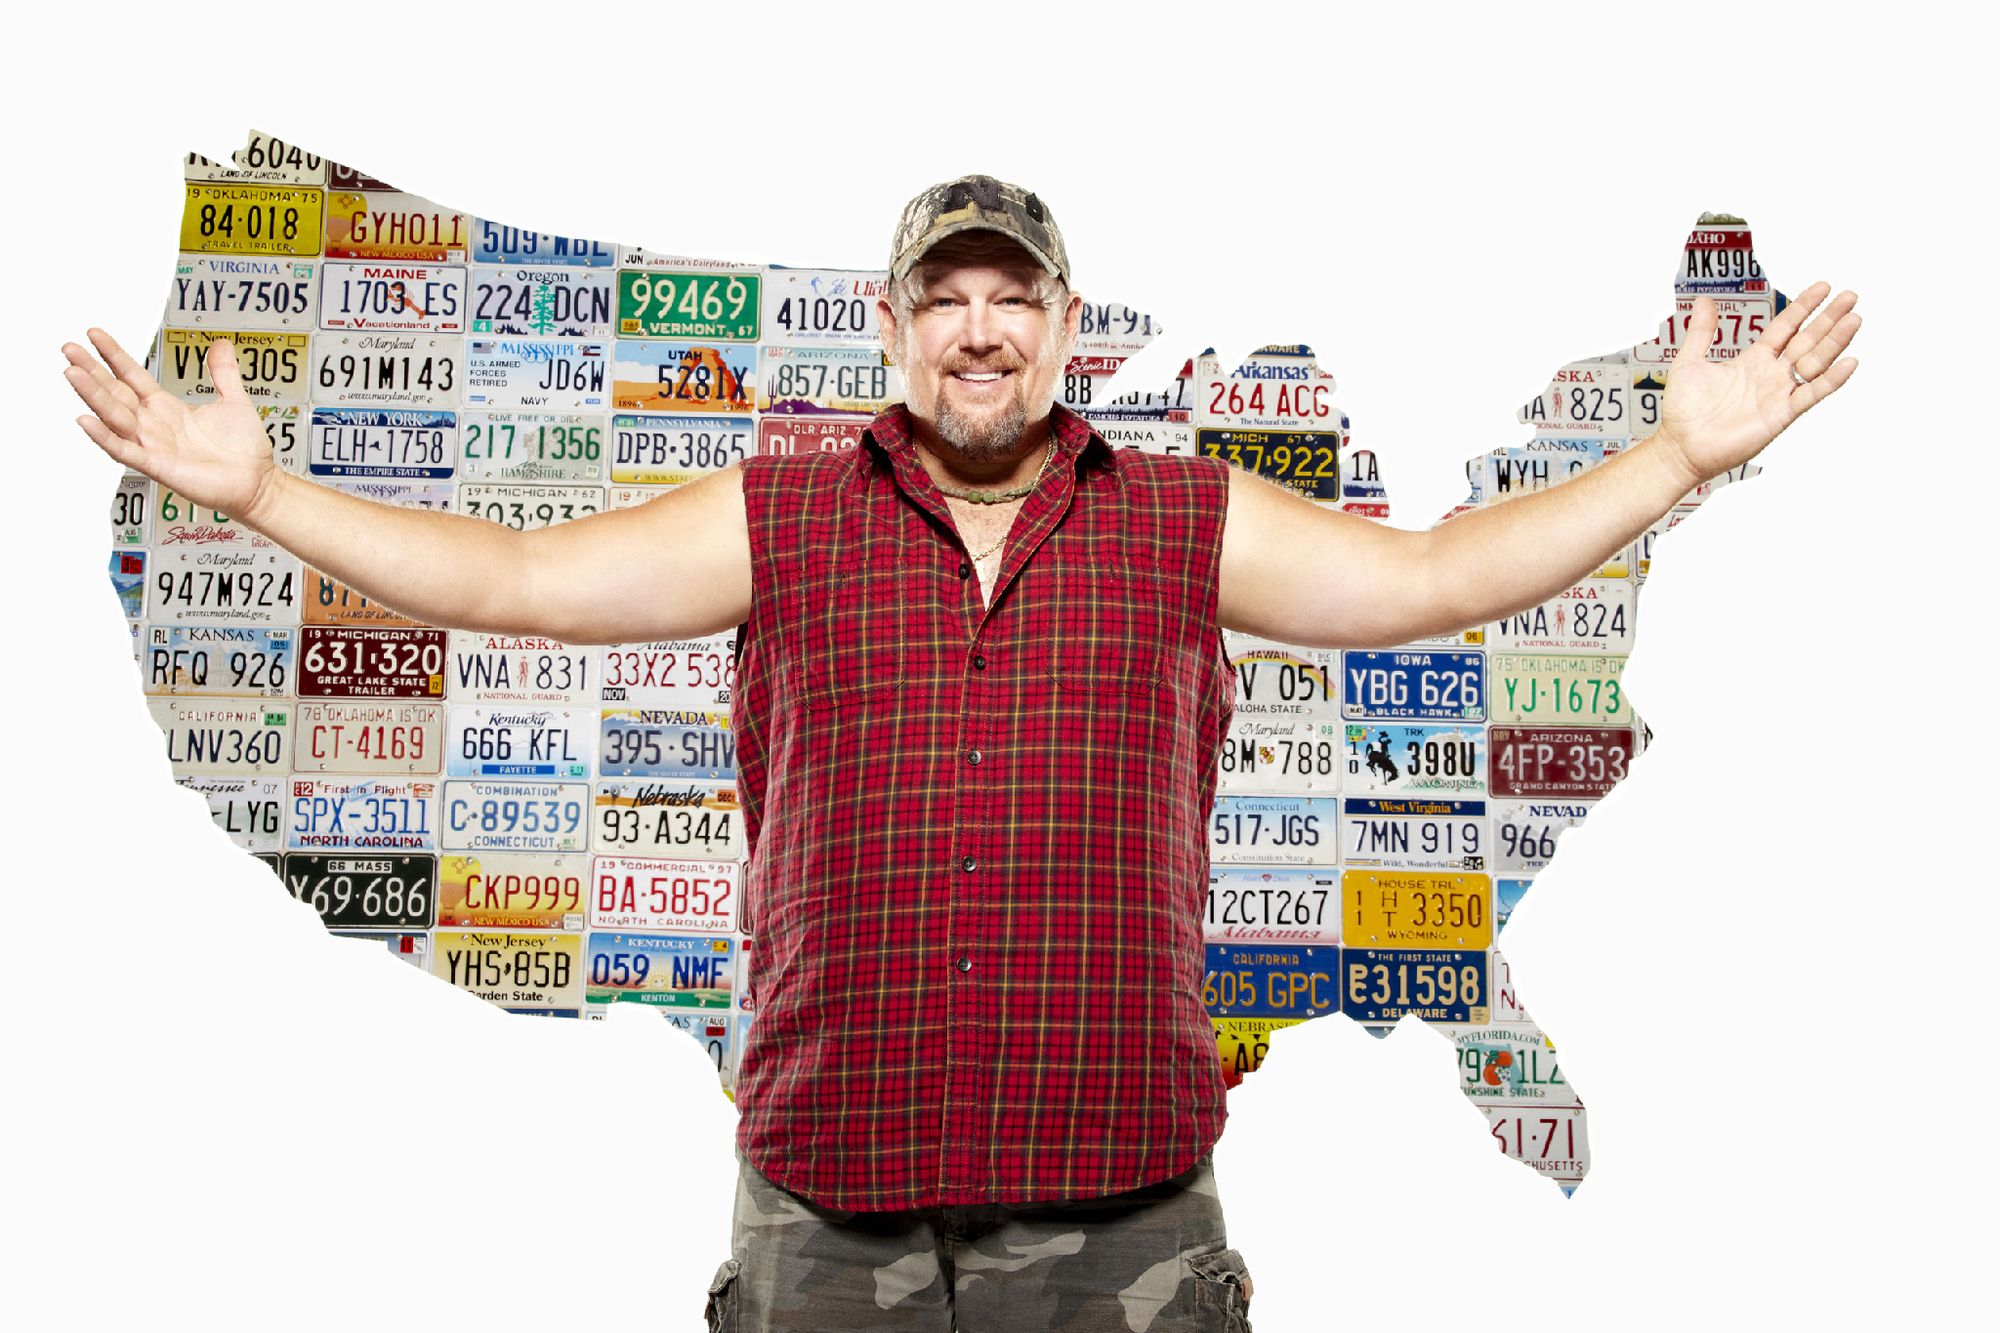 Only in America - Larry the Cable Guy